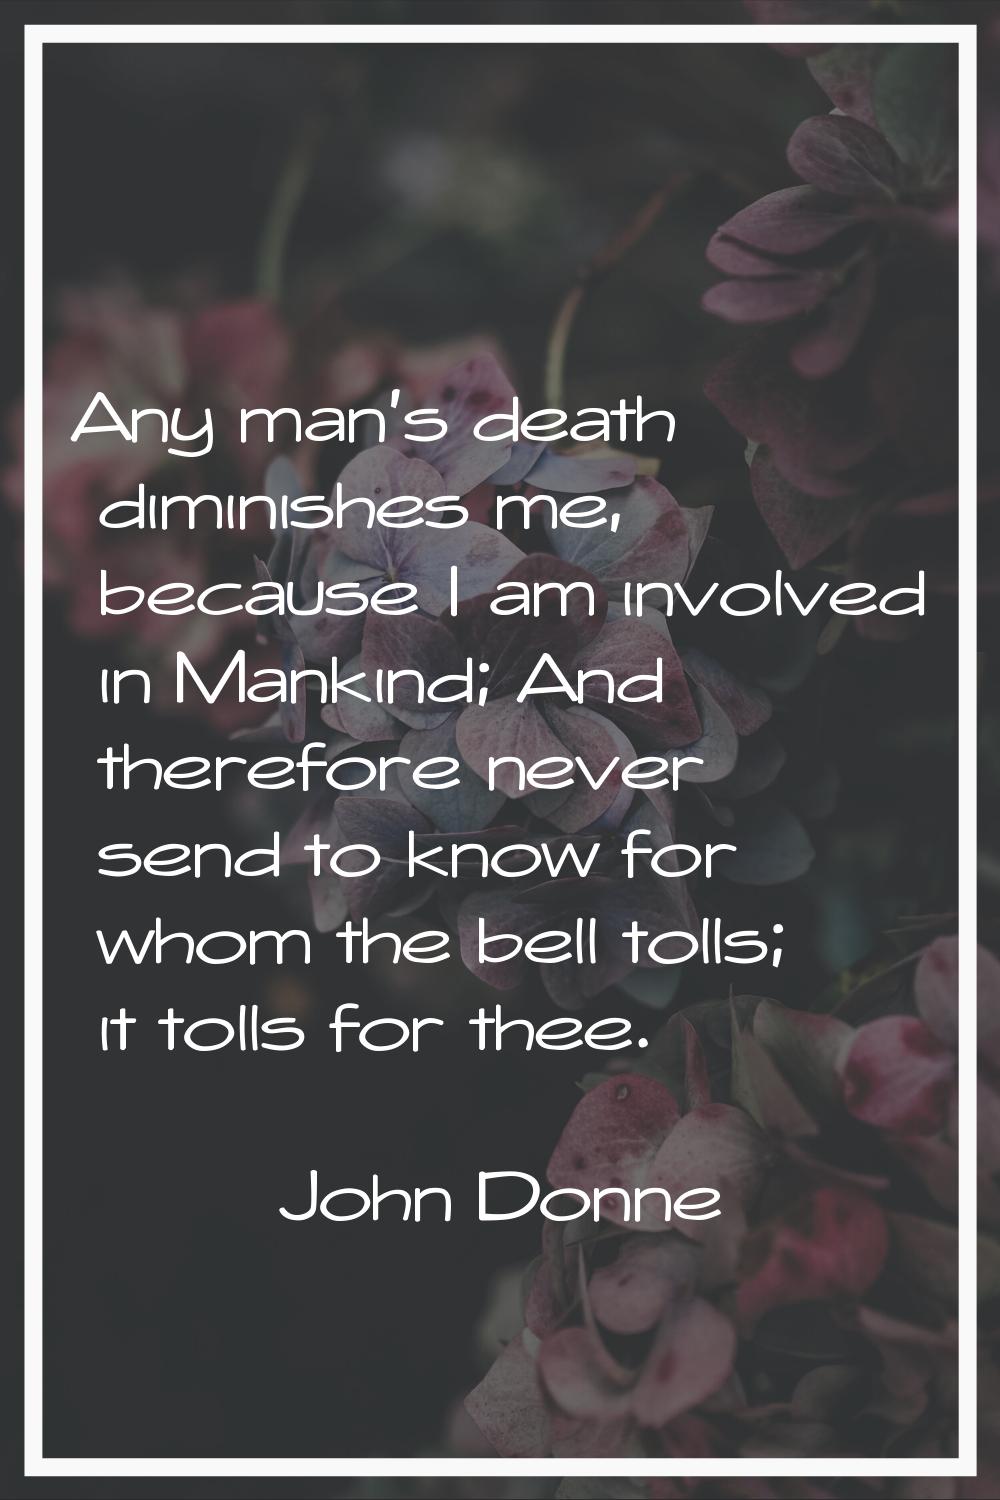 Any man's death diminishes me, because I am involved in Mankind; And therefore never send to know f